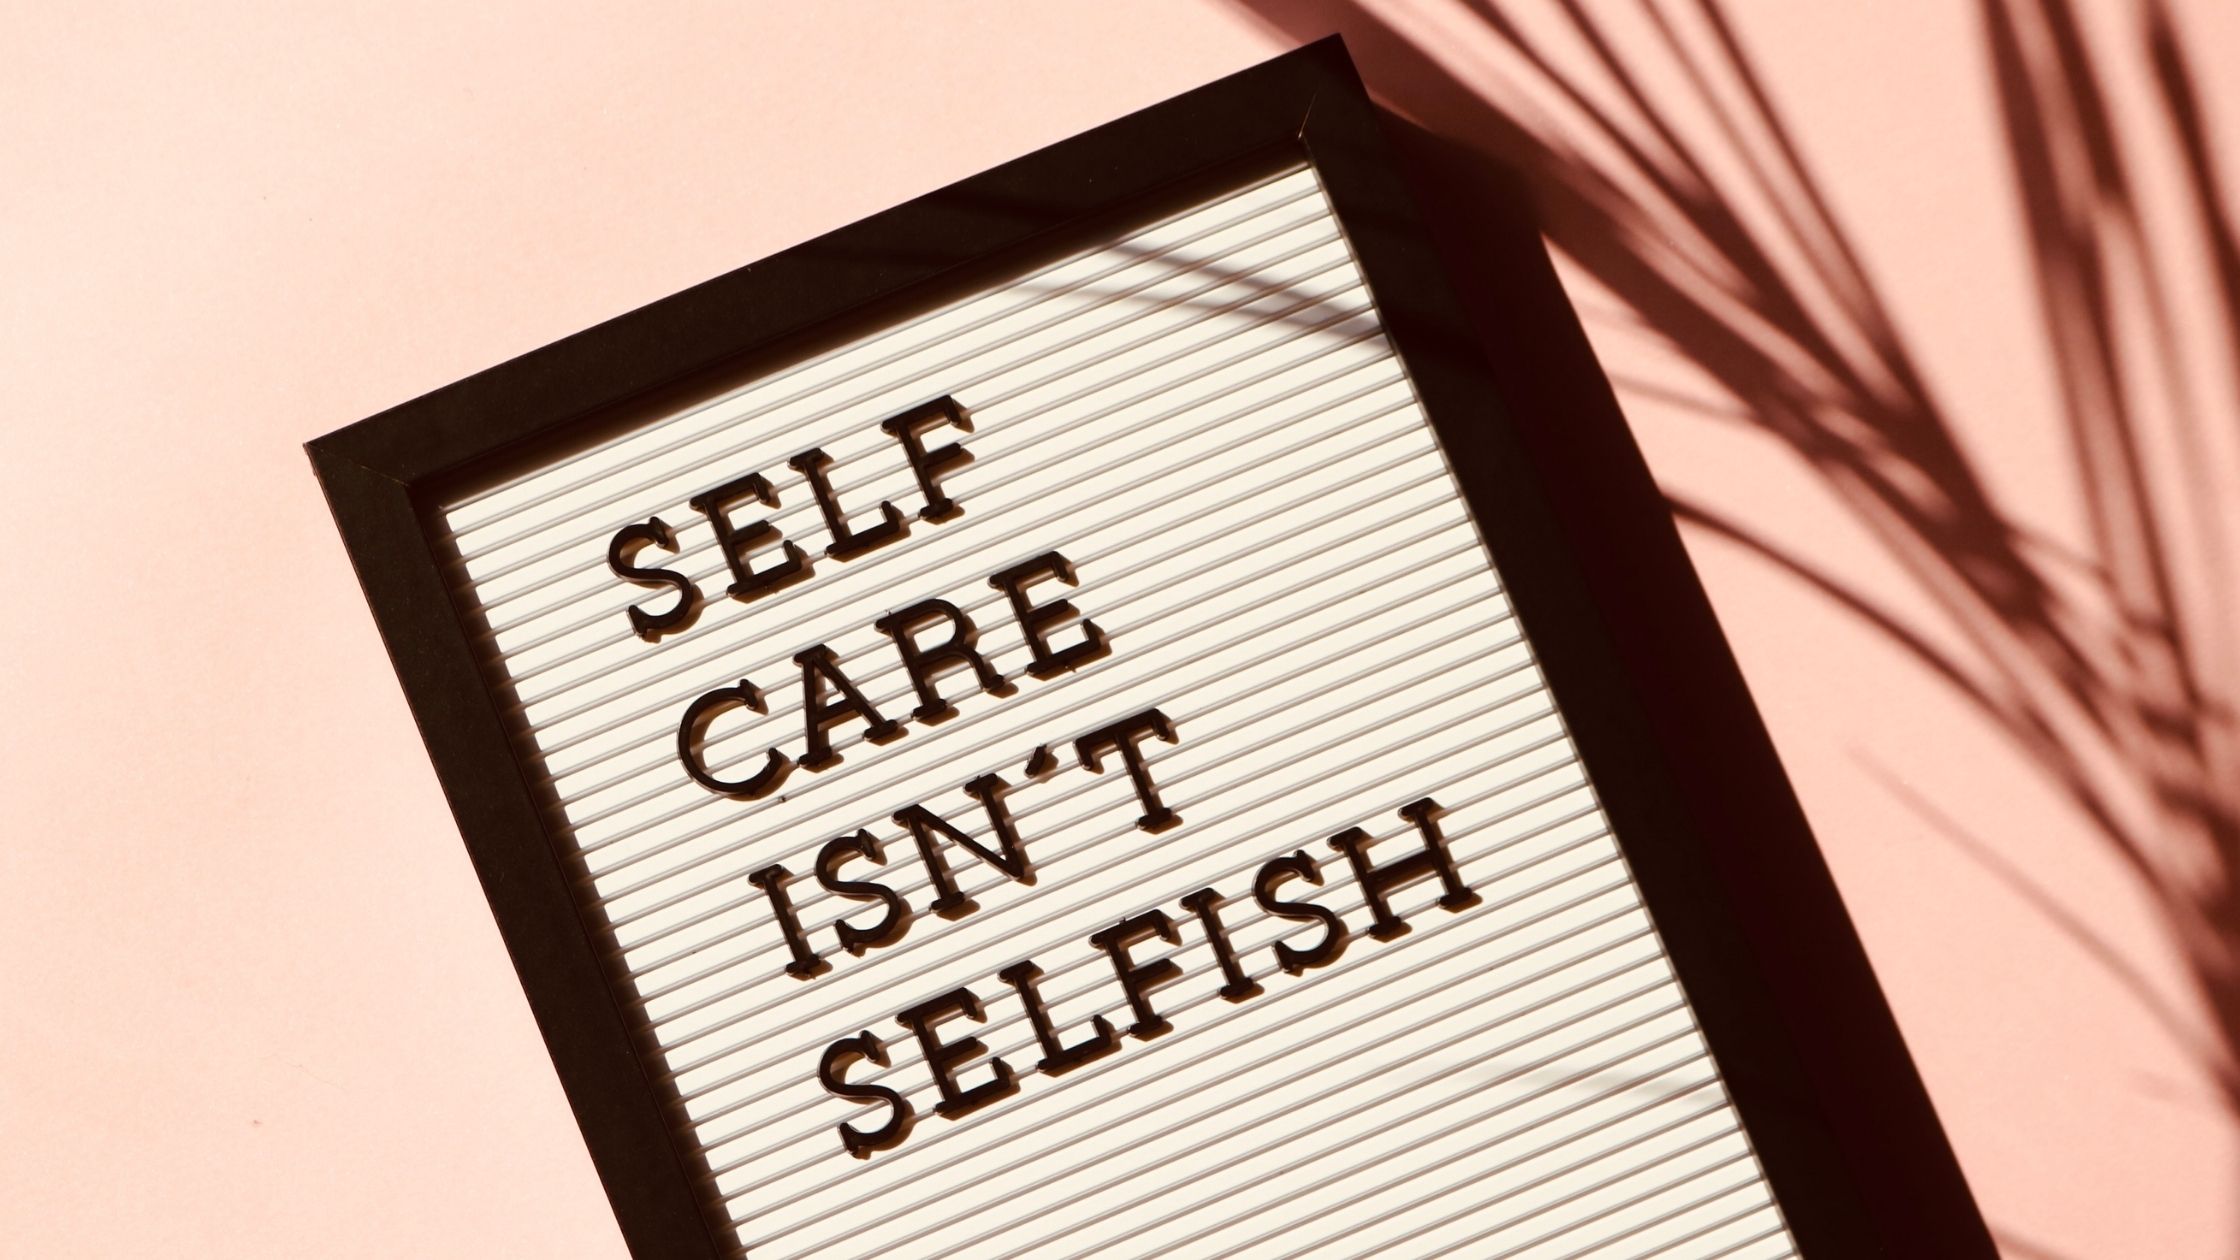 A picture of a letter board saying "Self care isn't selfish."